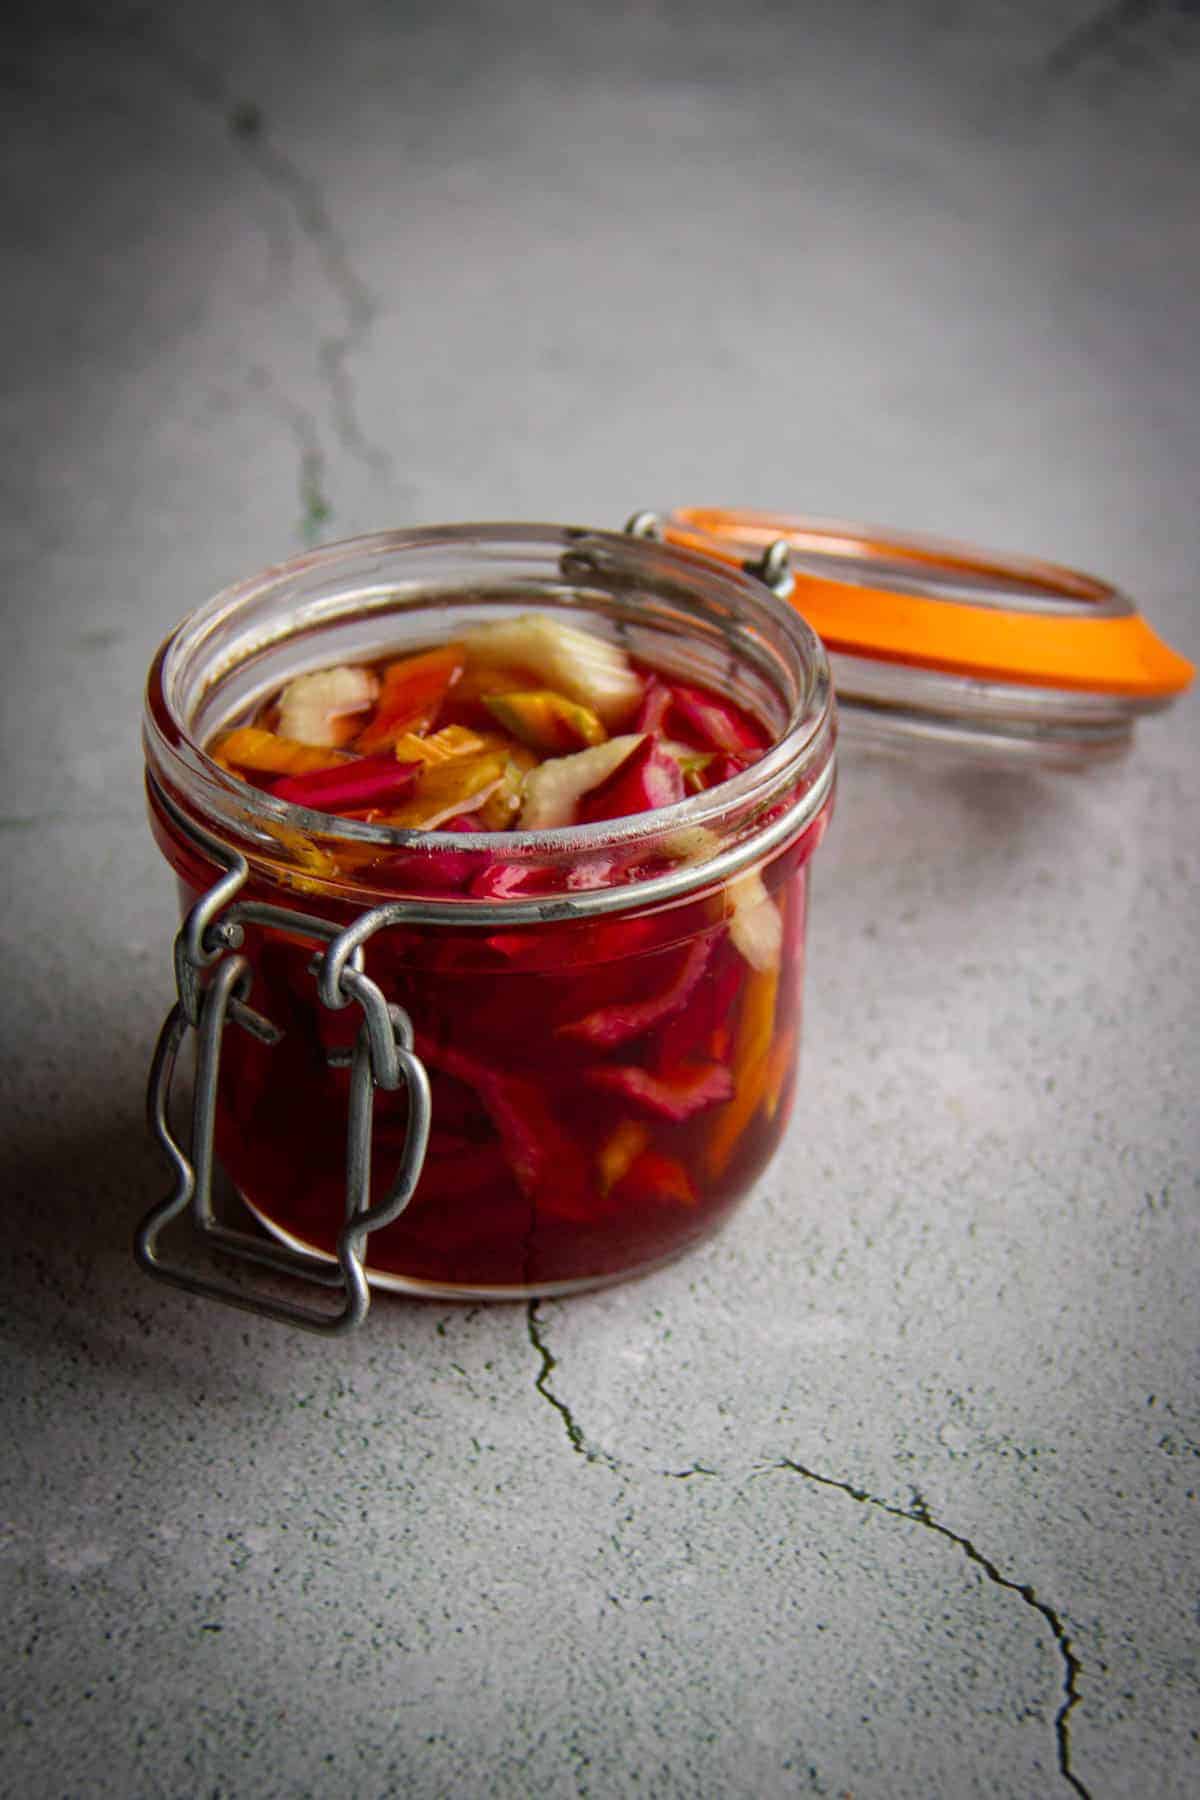 The pickled chard stems in a little mason jar.